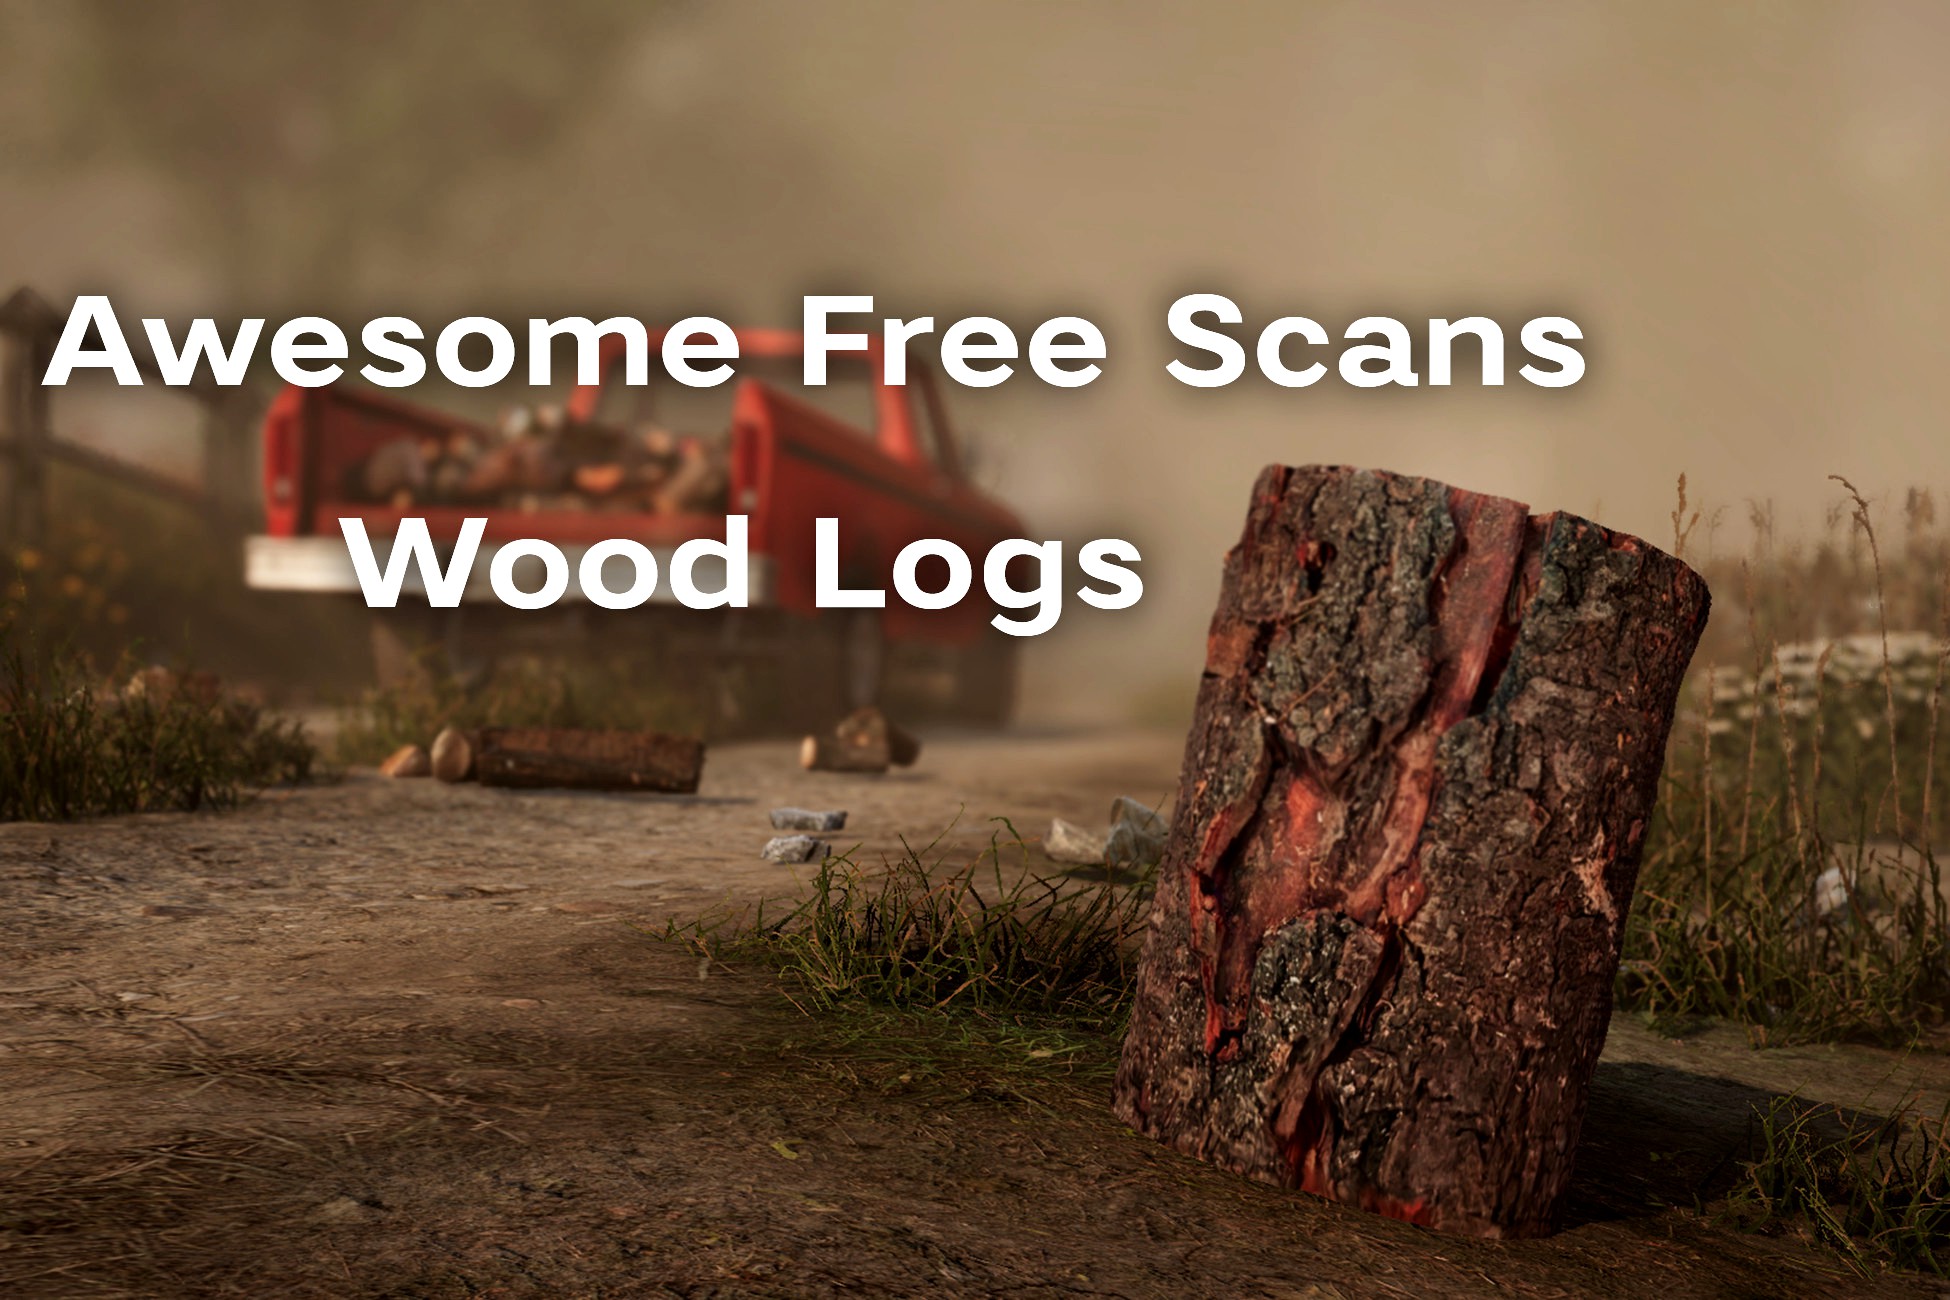 Awesome Free Scans - Wood Logs